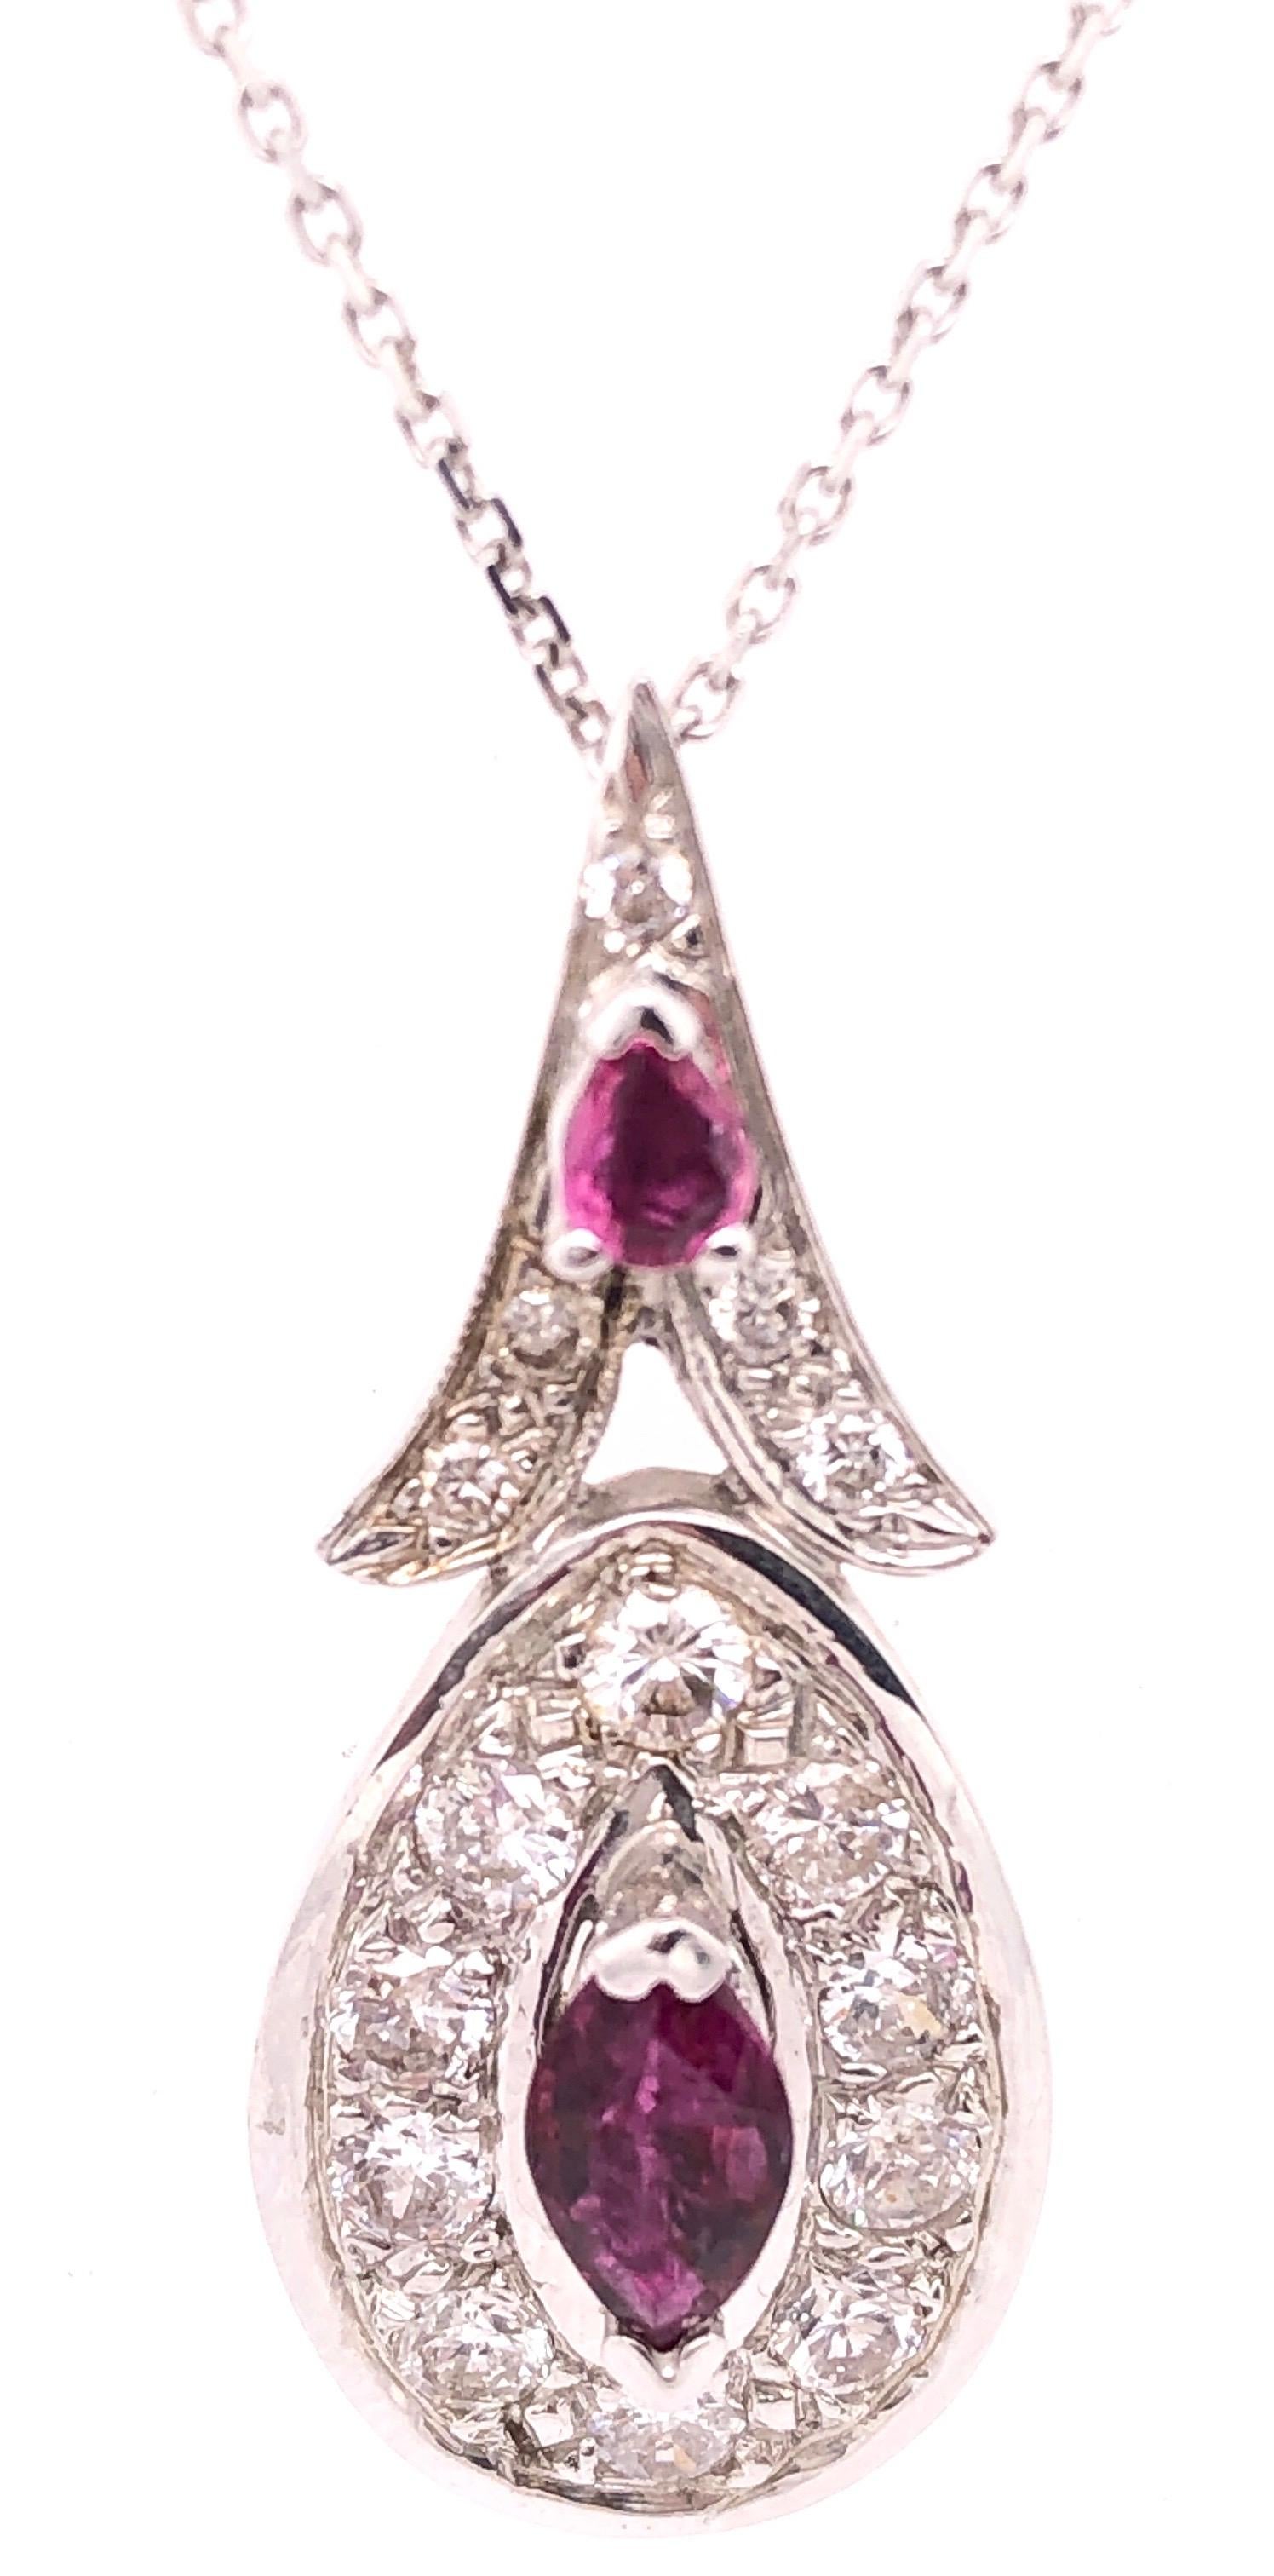 14Kt White Gold Charm 18 inch Necklace with Diamond And Ruby Pendant
1.25 Total Diamond Weight 
0.20ct Ruby Weight
6.53 grams total weight